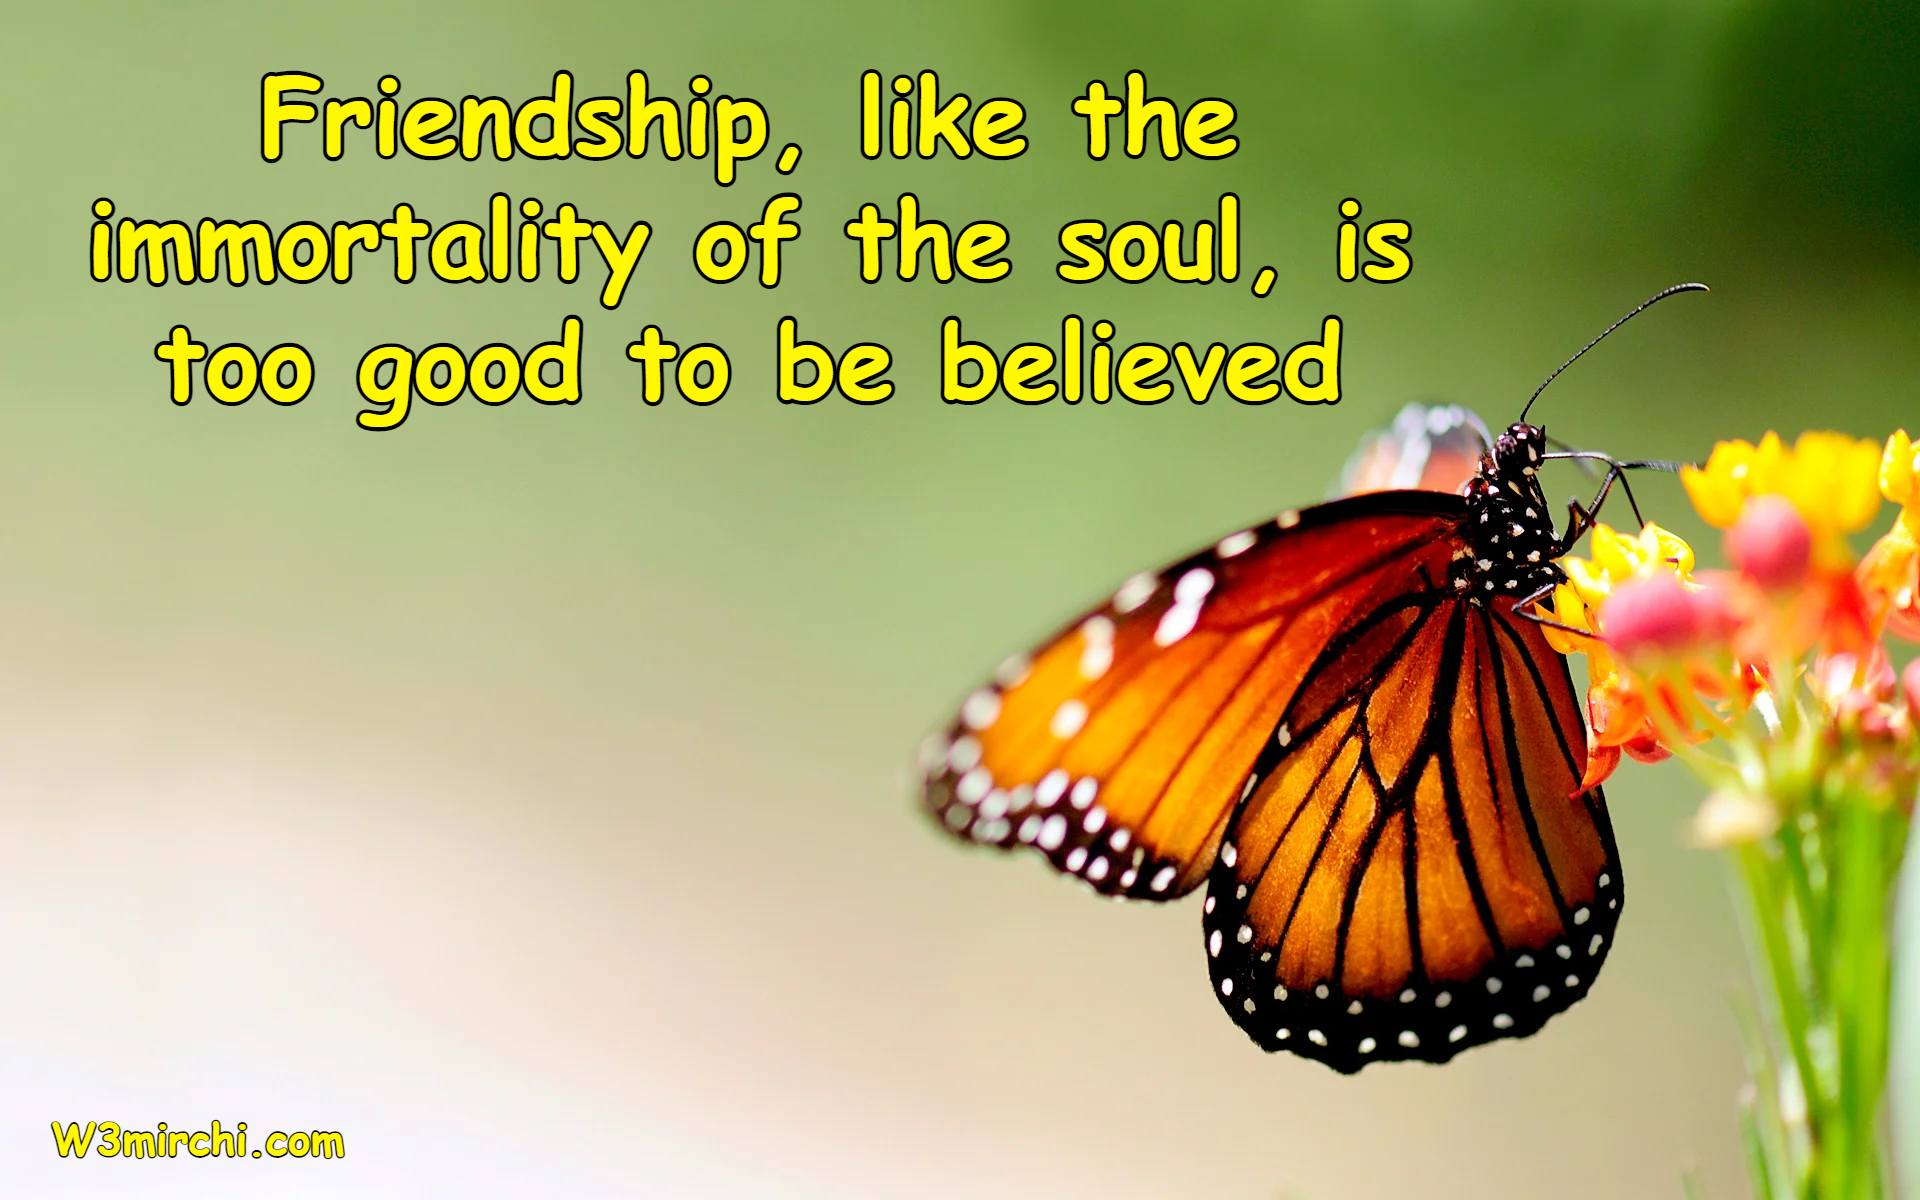 Friendship, like the immortality of